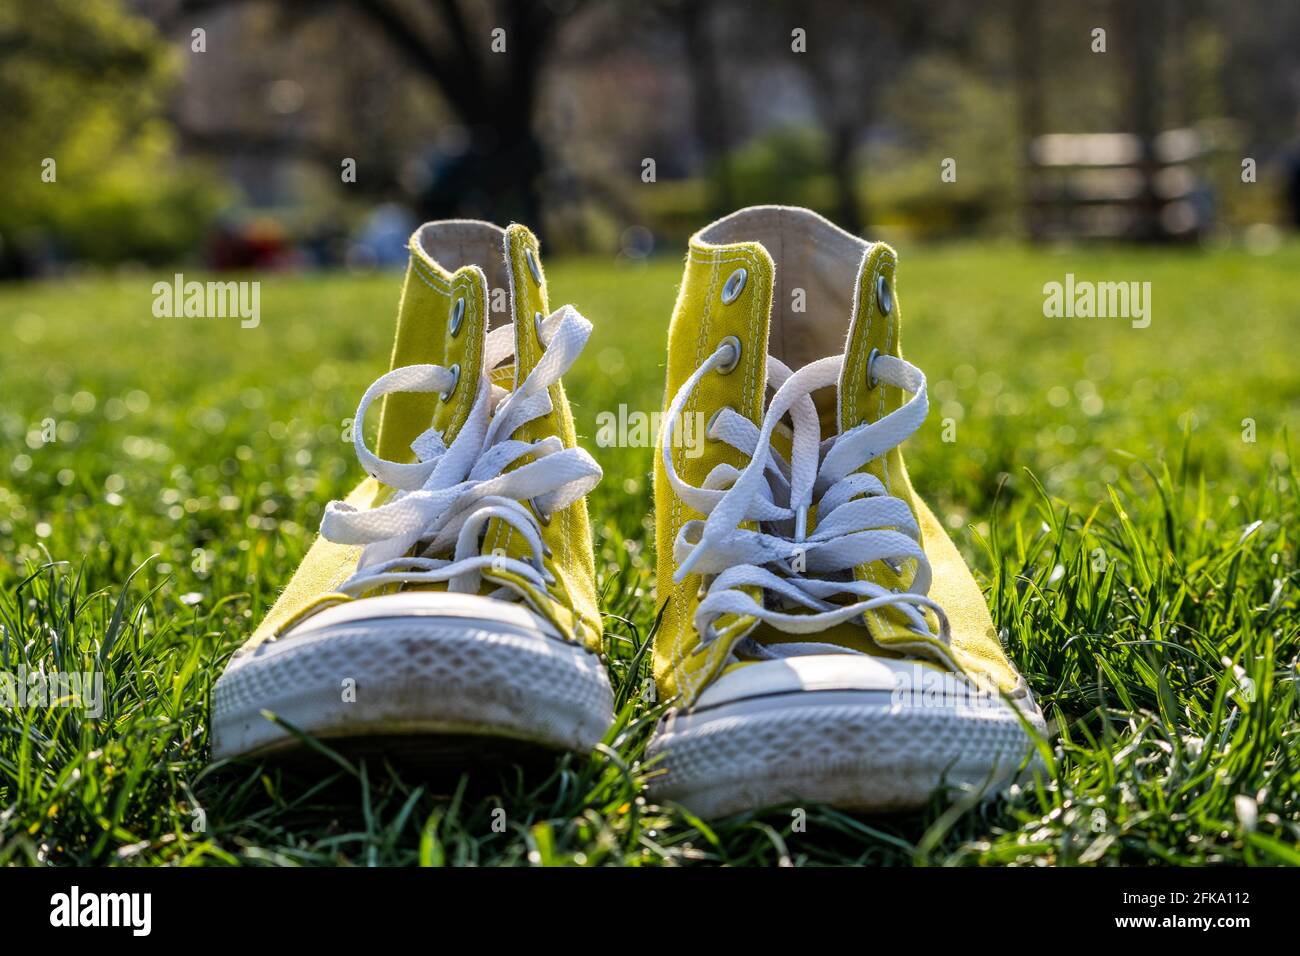 Yellow Converse High Resolution Stock Photography and Images - Alamy